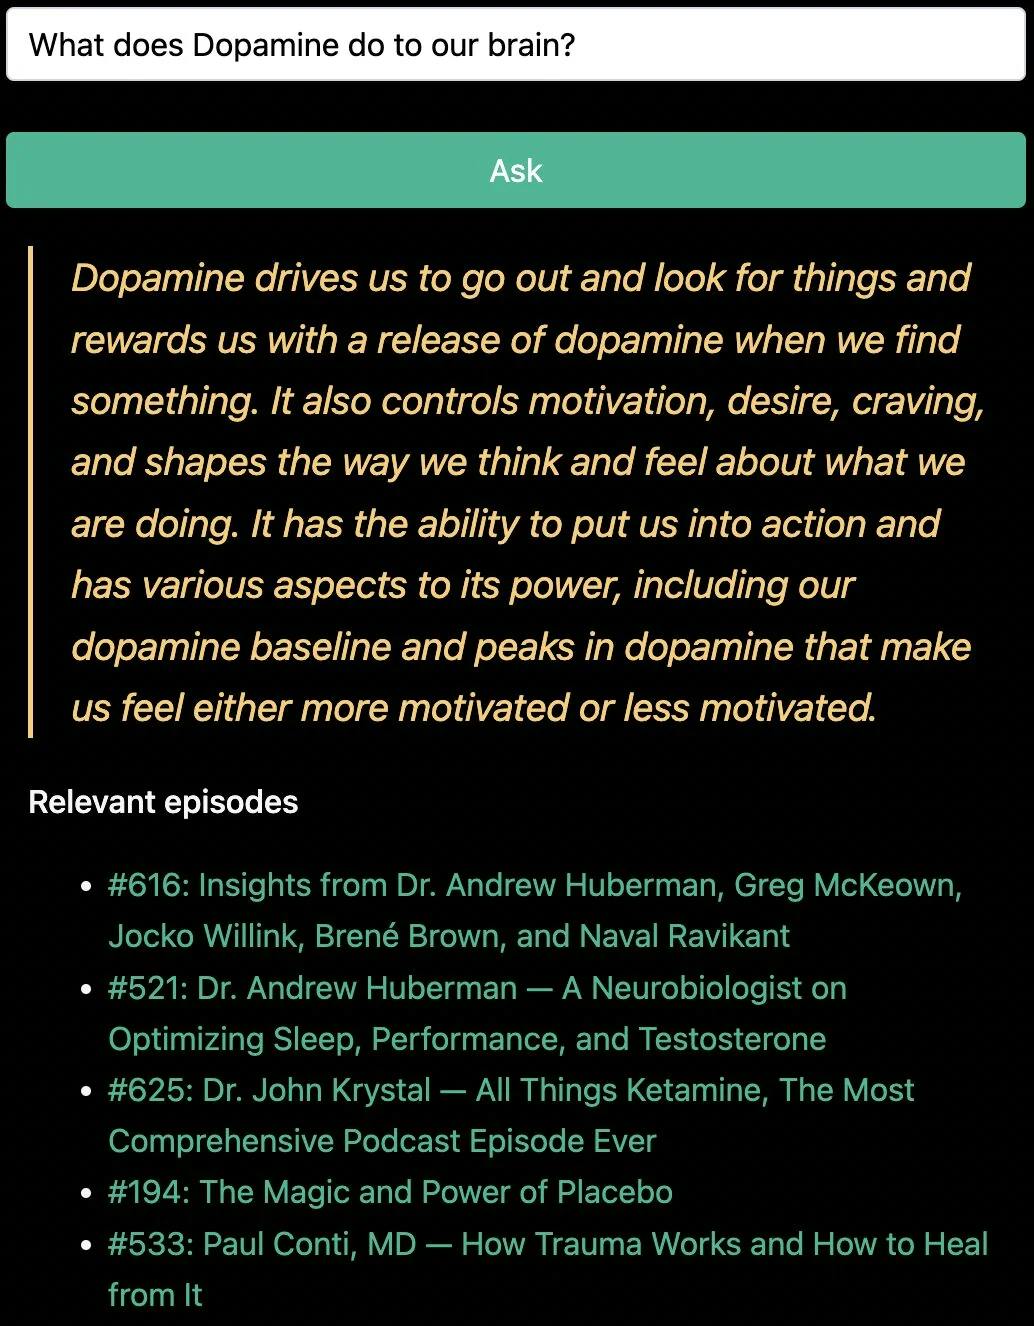 What does dopamine do to our brain?